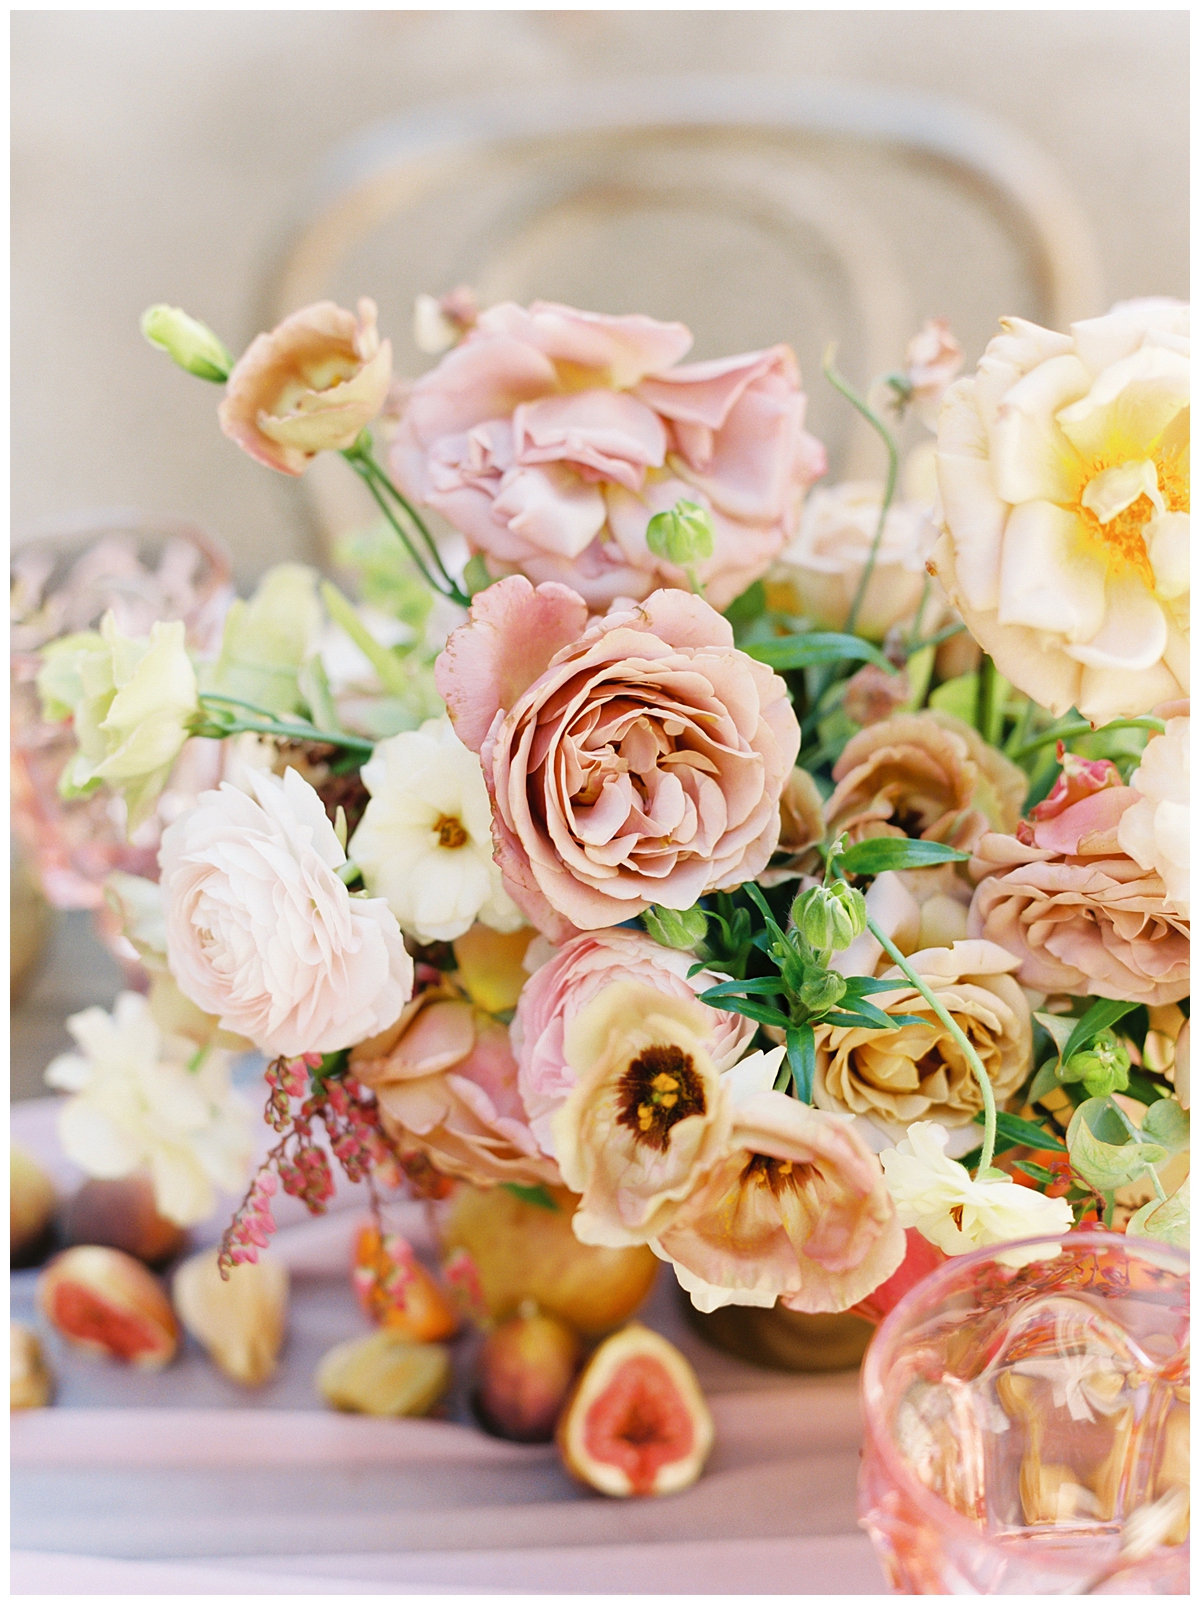 A wedding bouquet is displayed in varying shades of light pink, yellow, and green. 